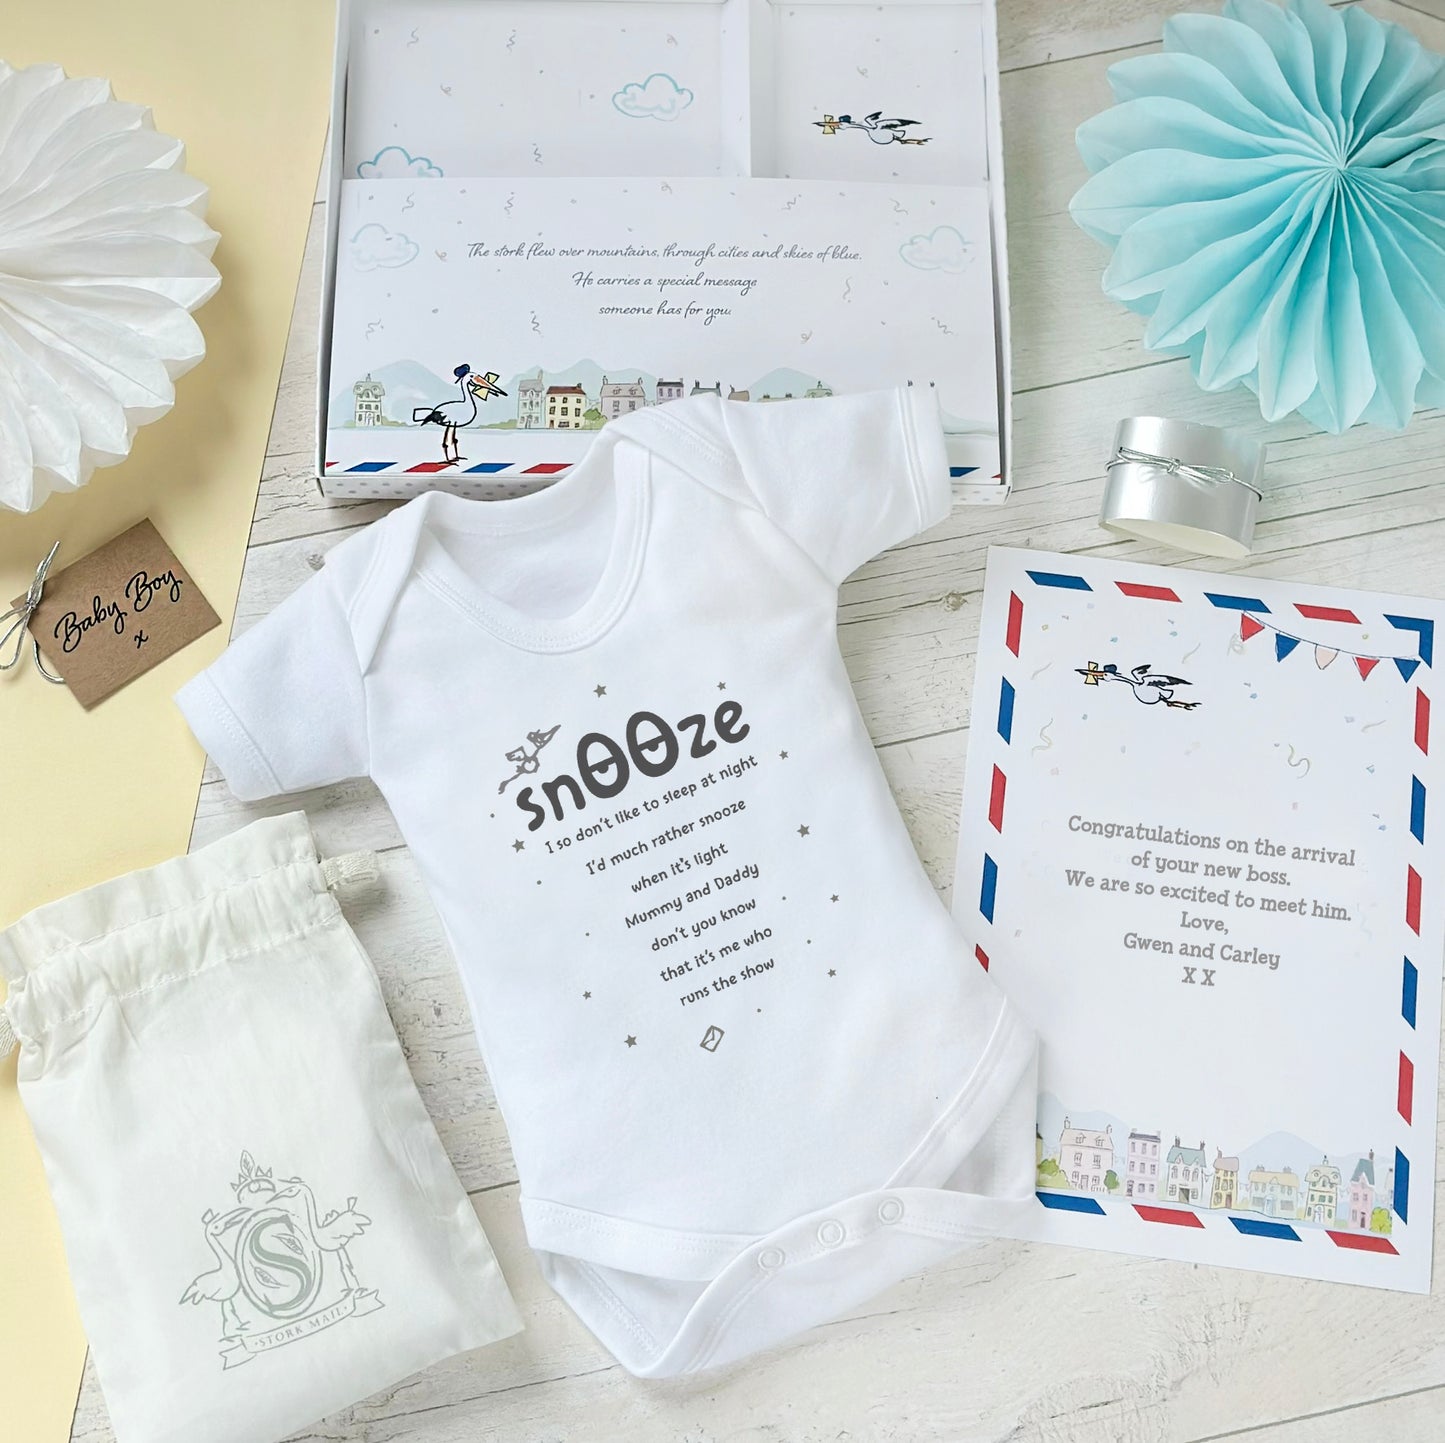 Snooze, New Baby Gift Box